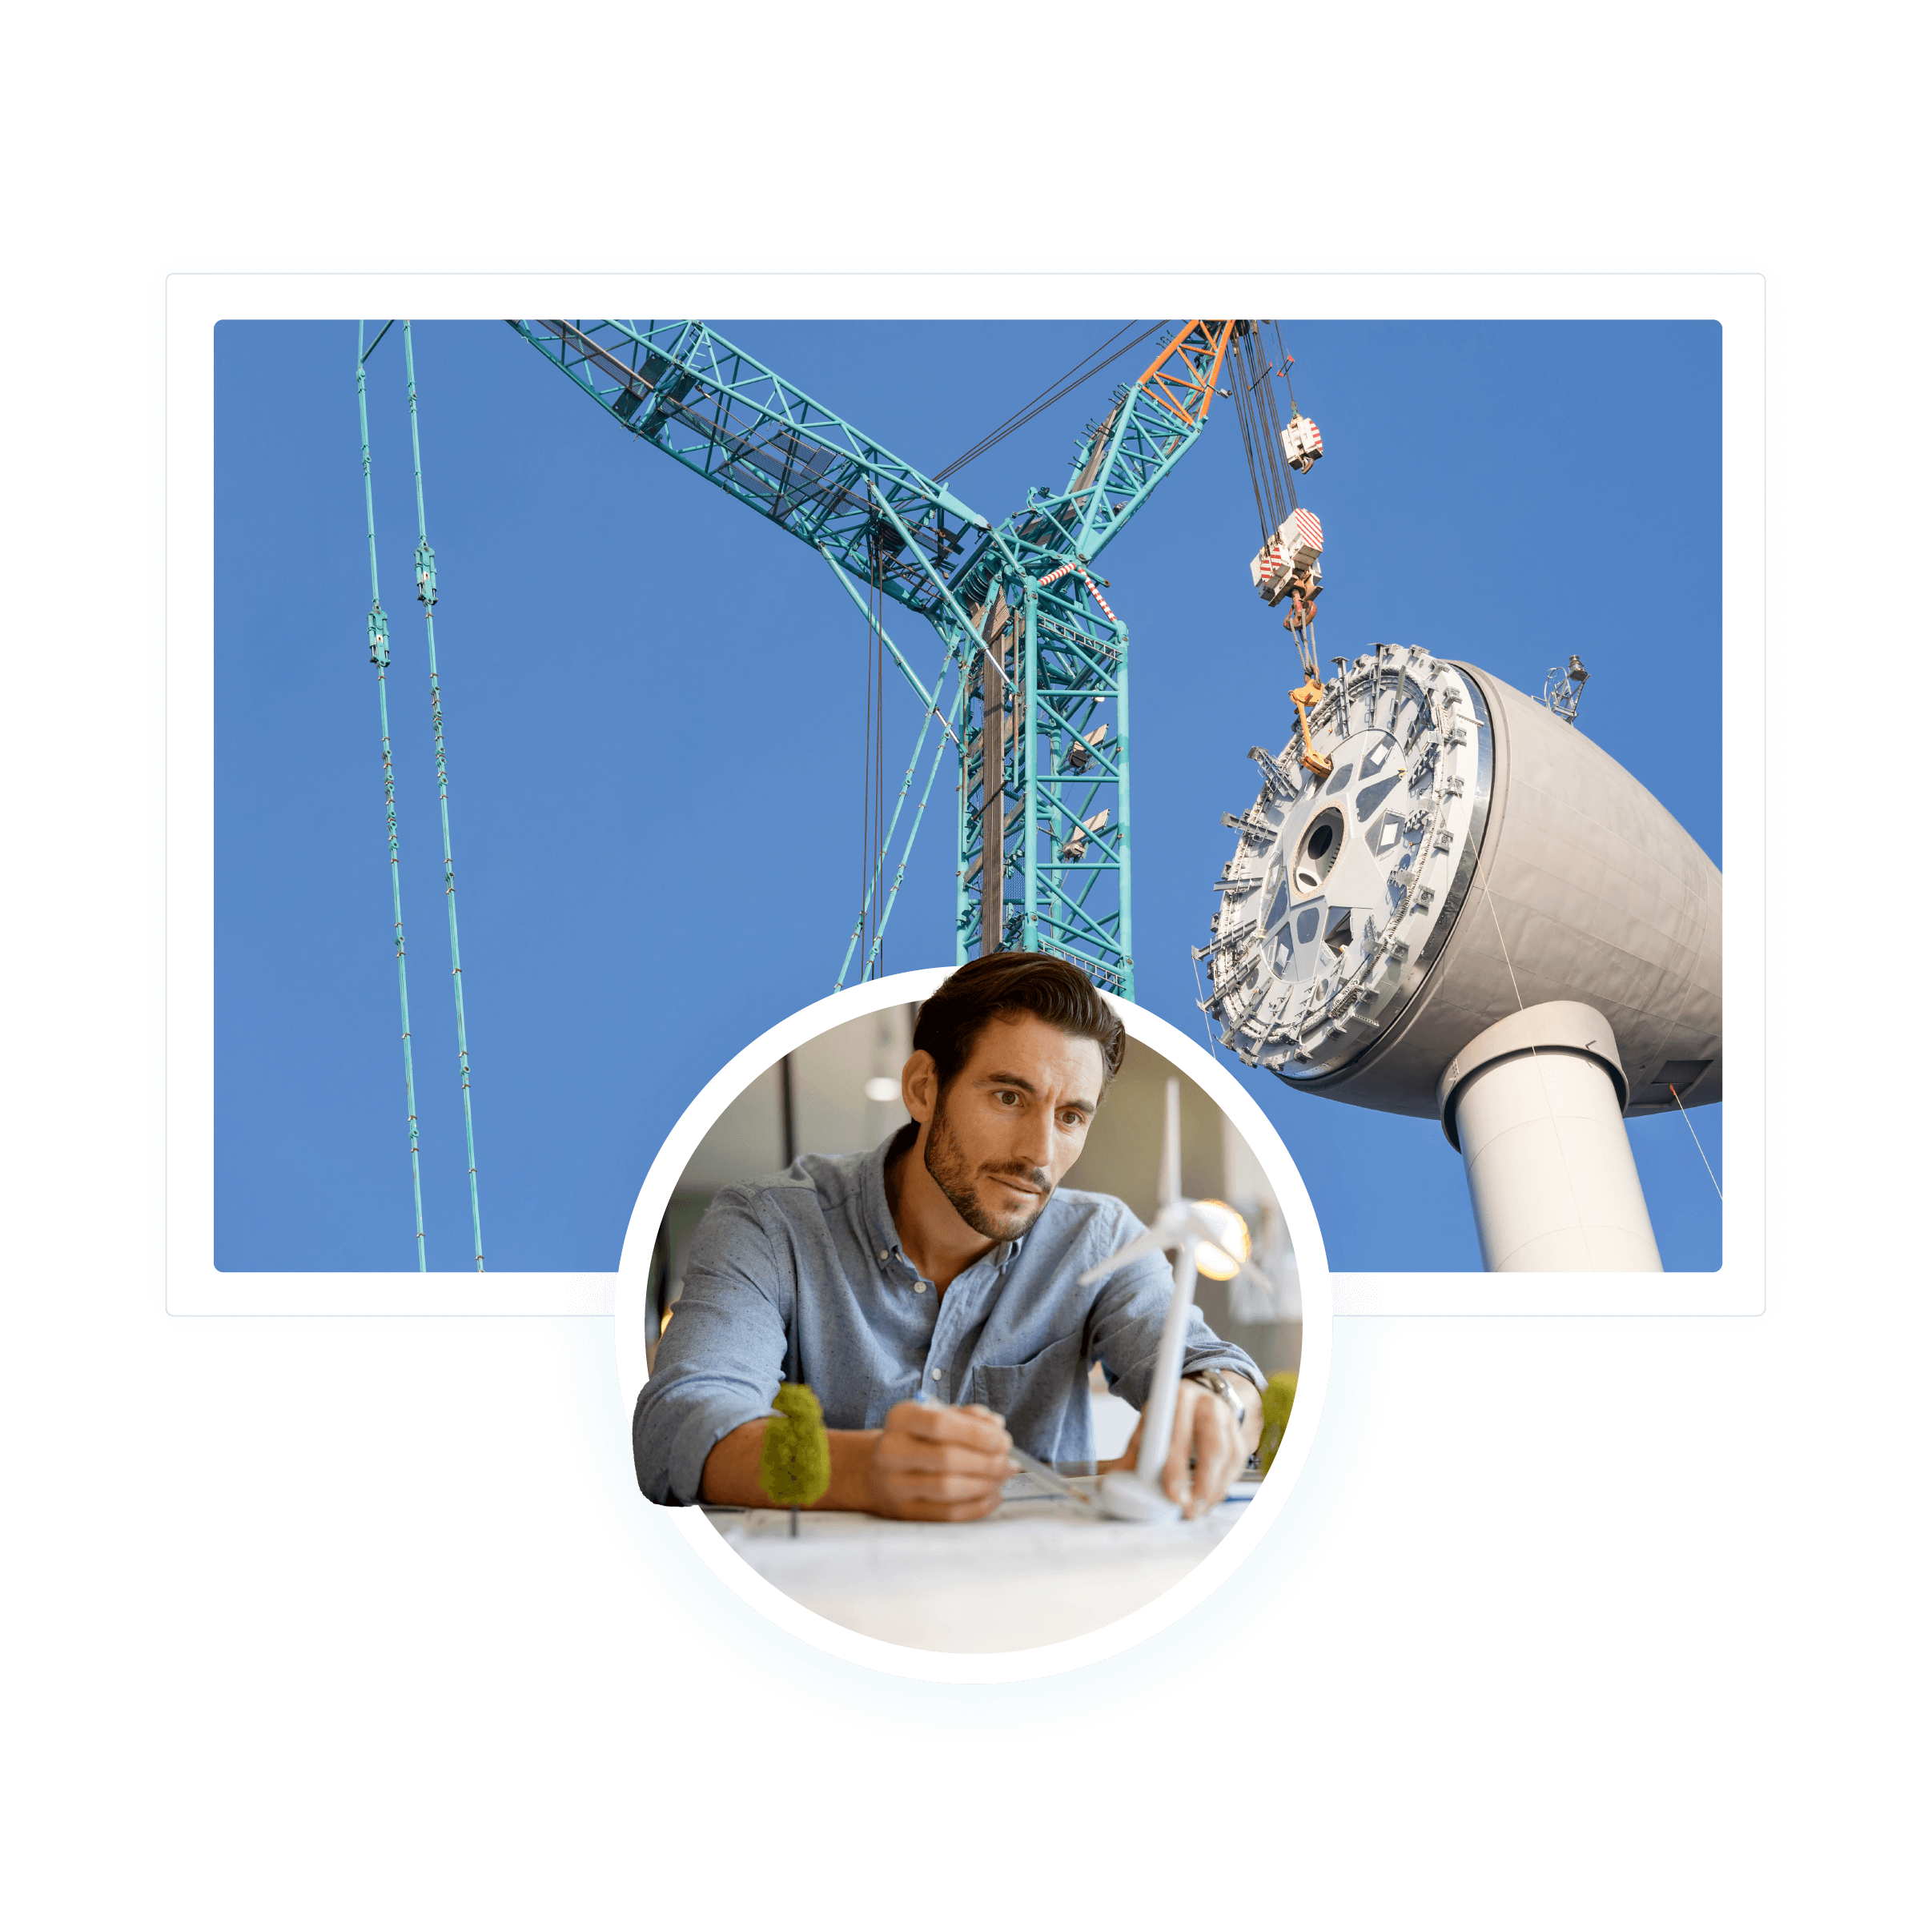 A wind turbine being built and a man reviewing plans